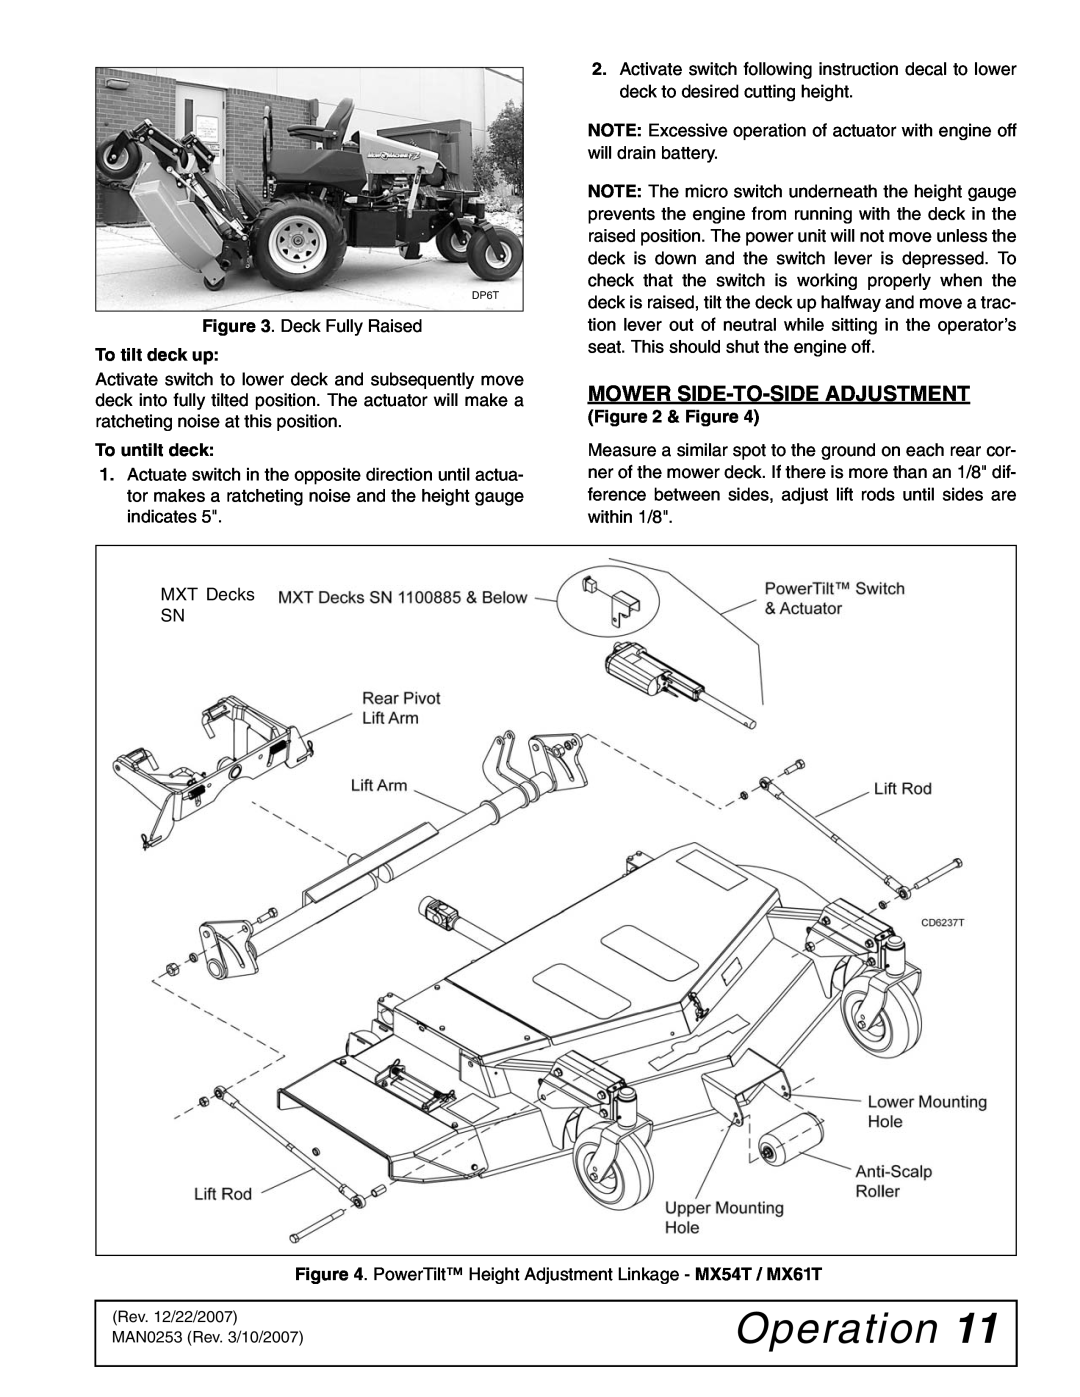 Woods Equipment MX54T, MX61T manual Mower Side-To-Side Adjustment, Operation 